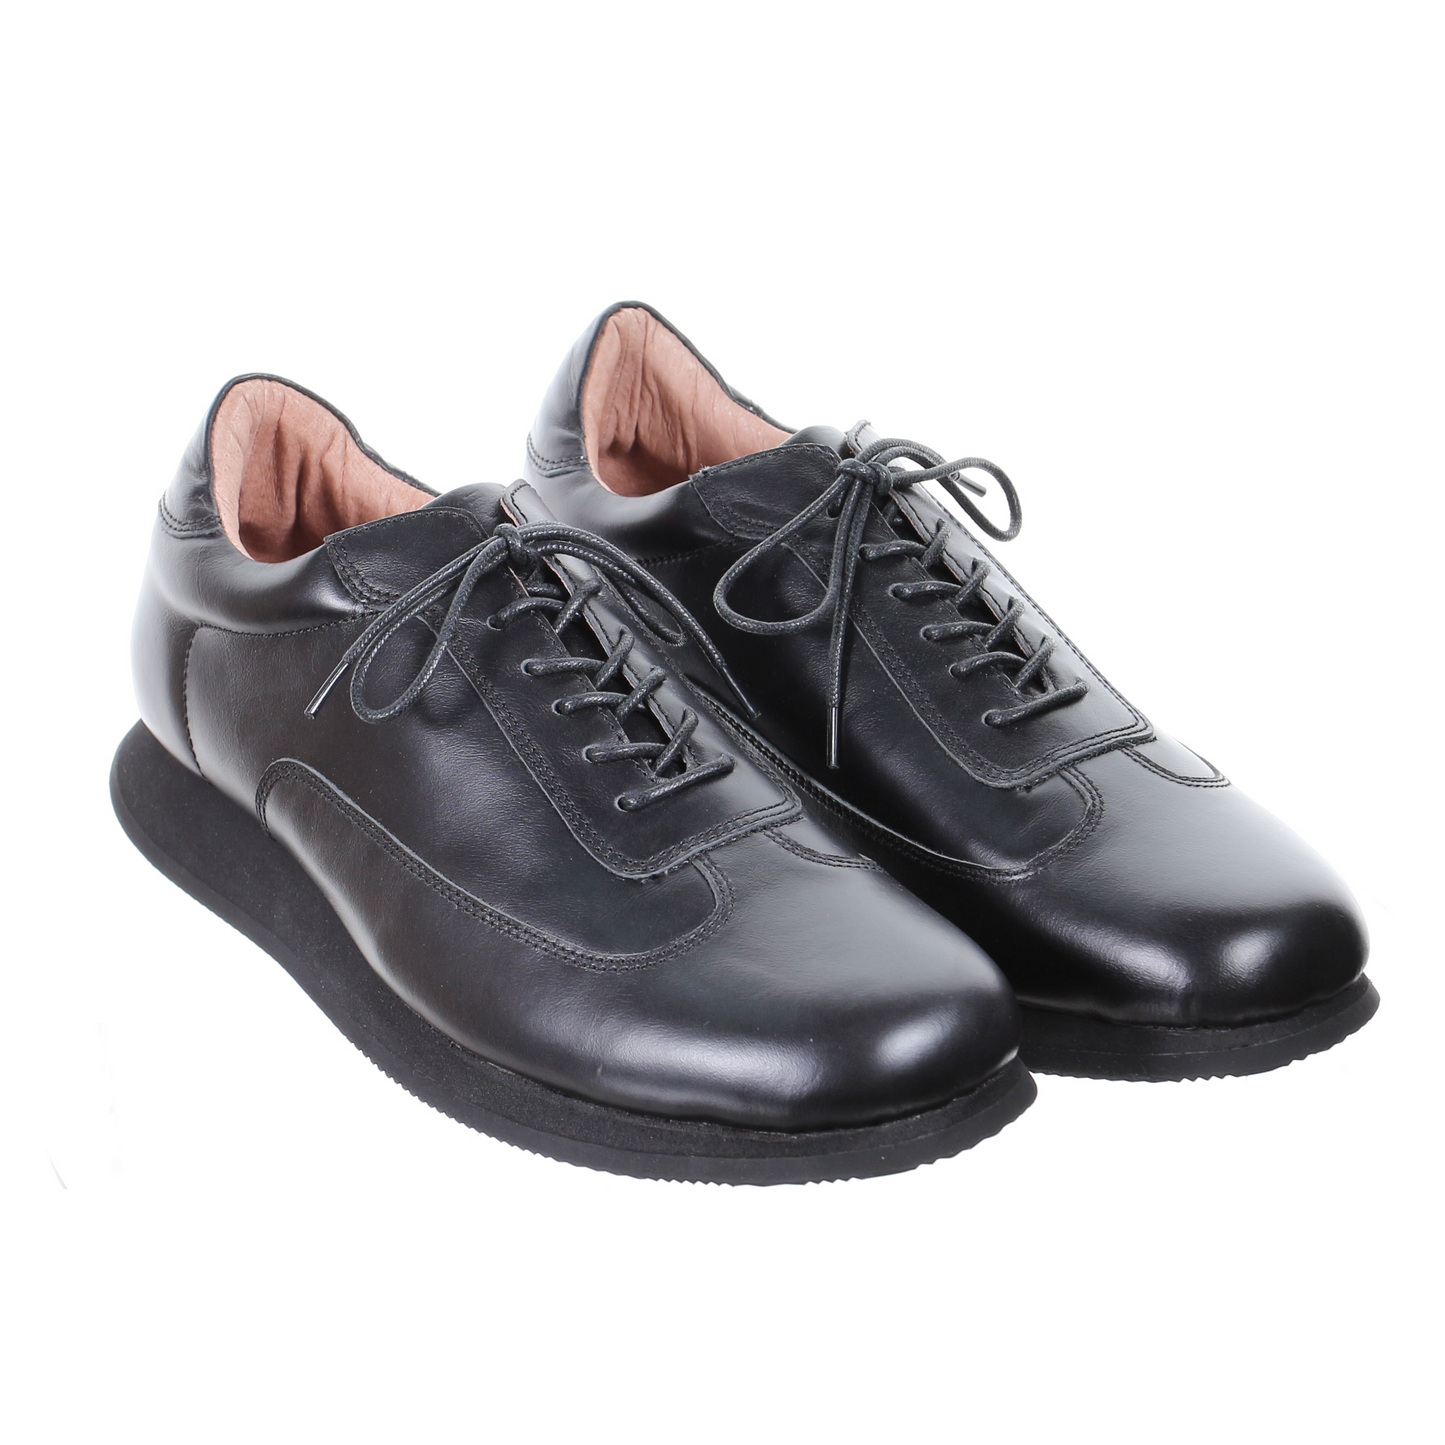 Men's Style Lace Up Leather Casual Shoes (Black)